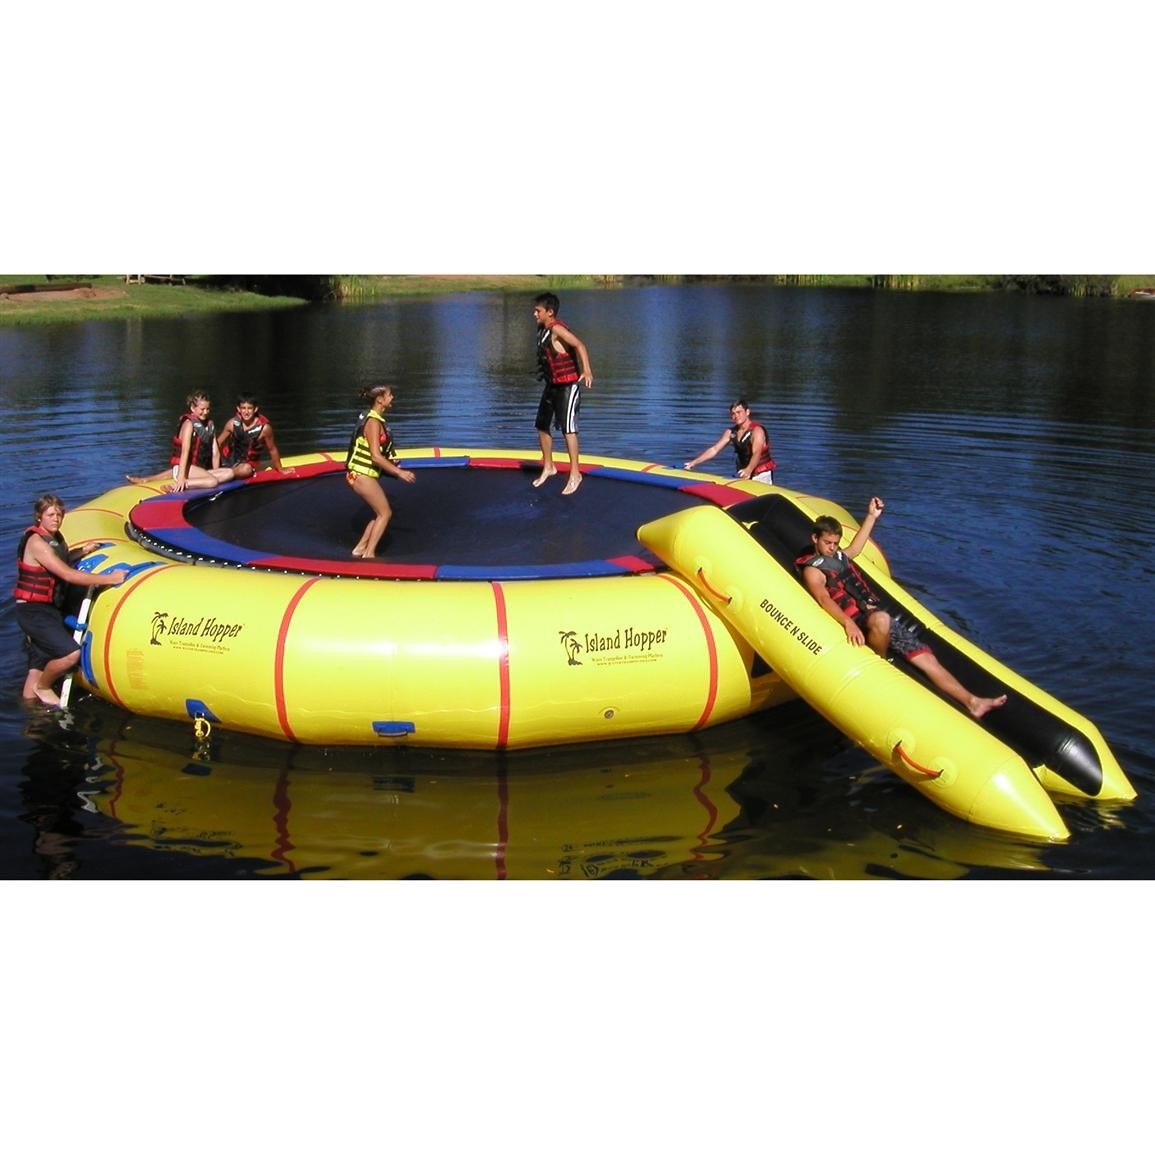 Giant lake inflatables 2